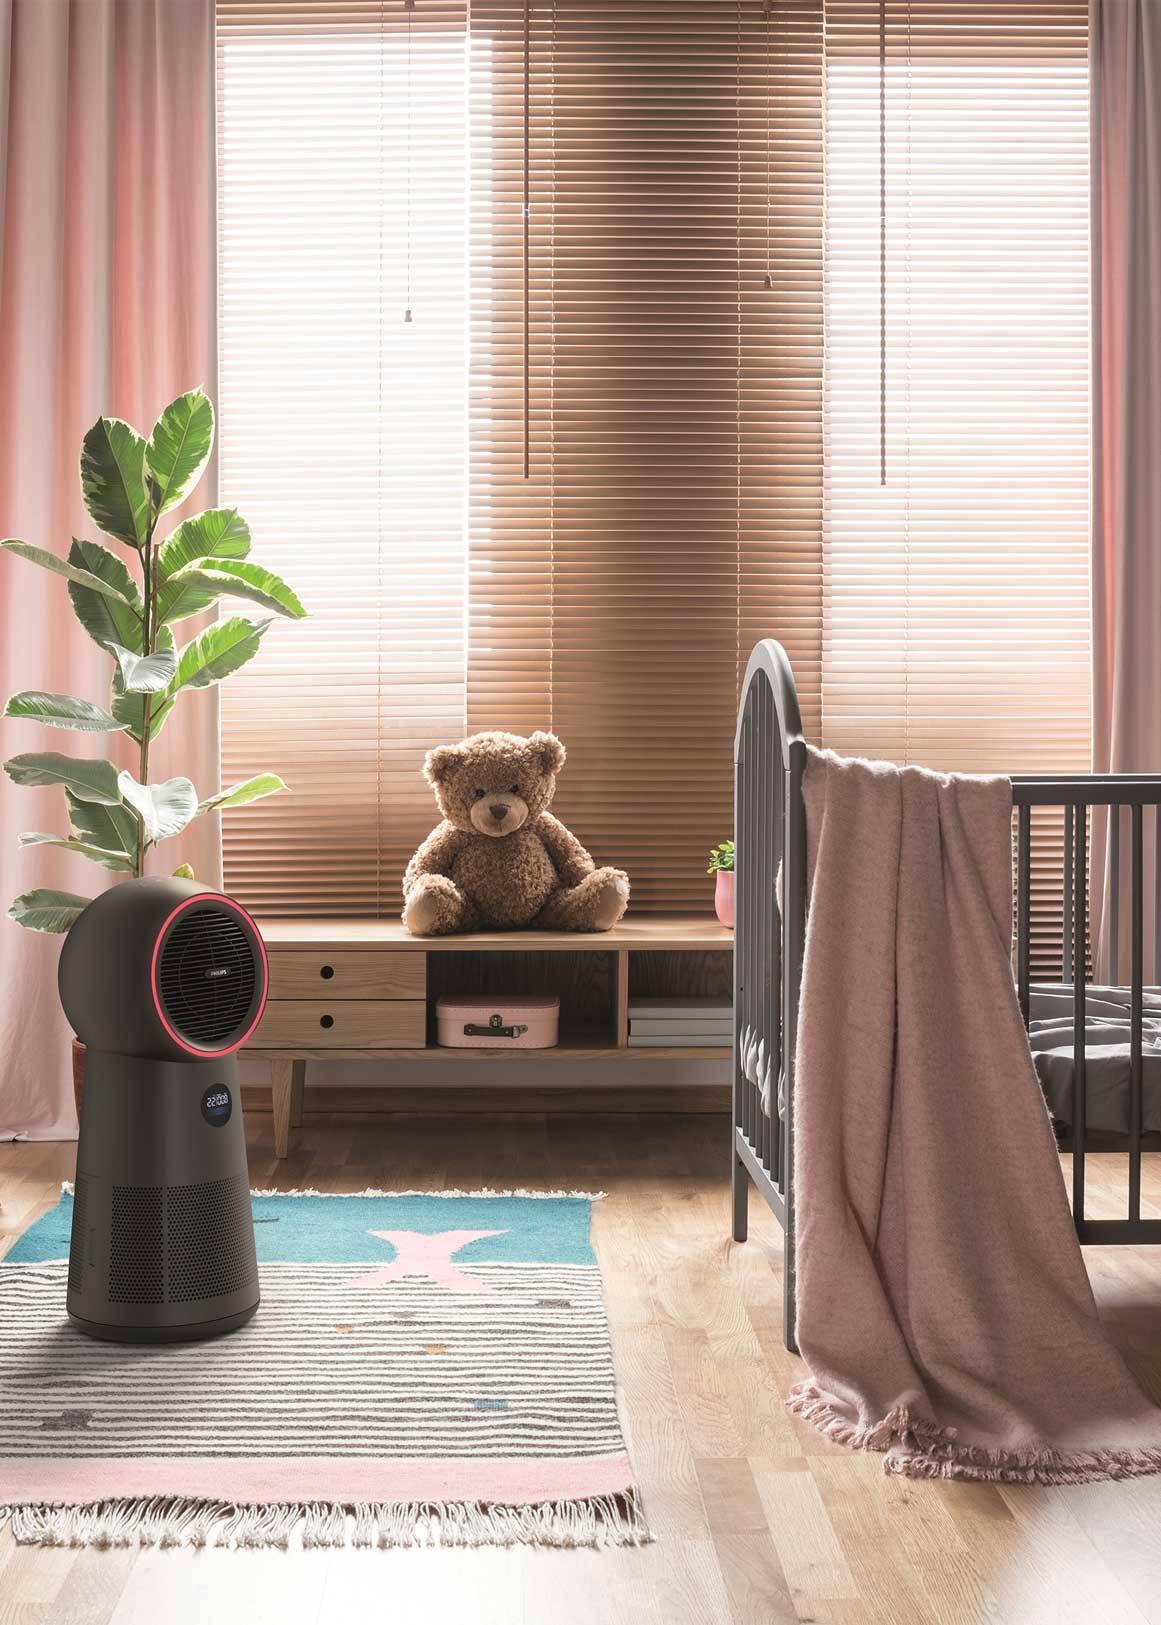 PHILIPS 2000 Series AMF220/35 3-in-1 Air Purifier, Fan & Heater